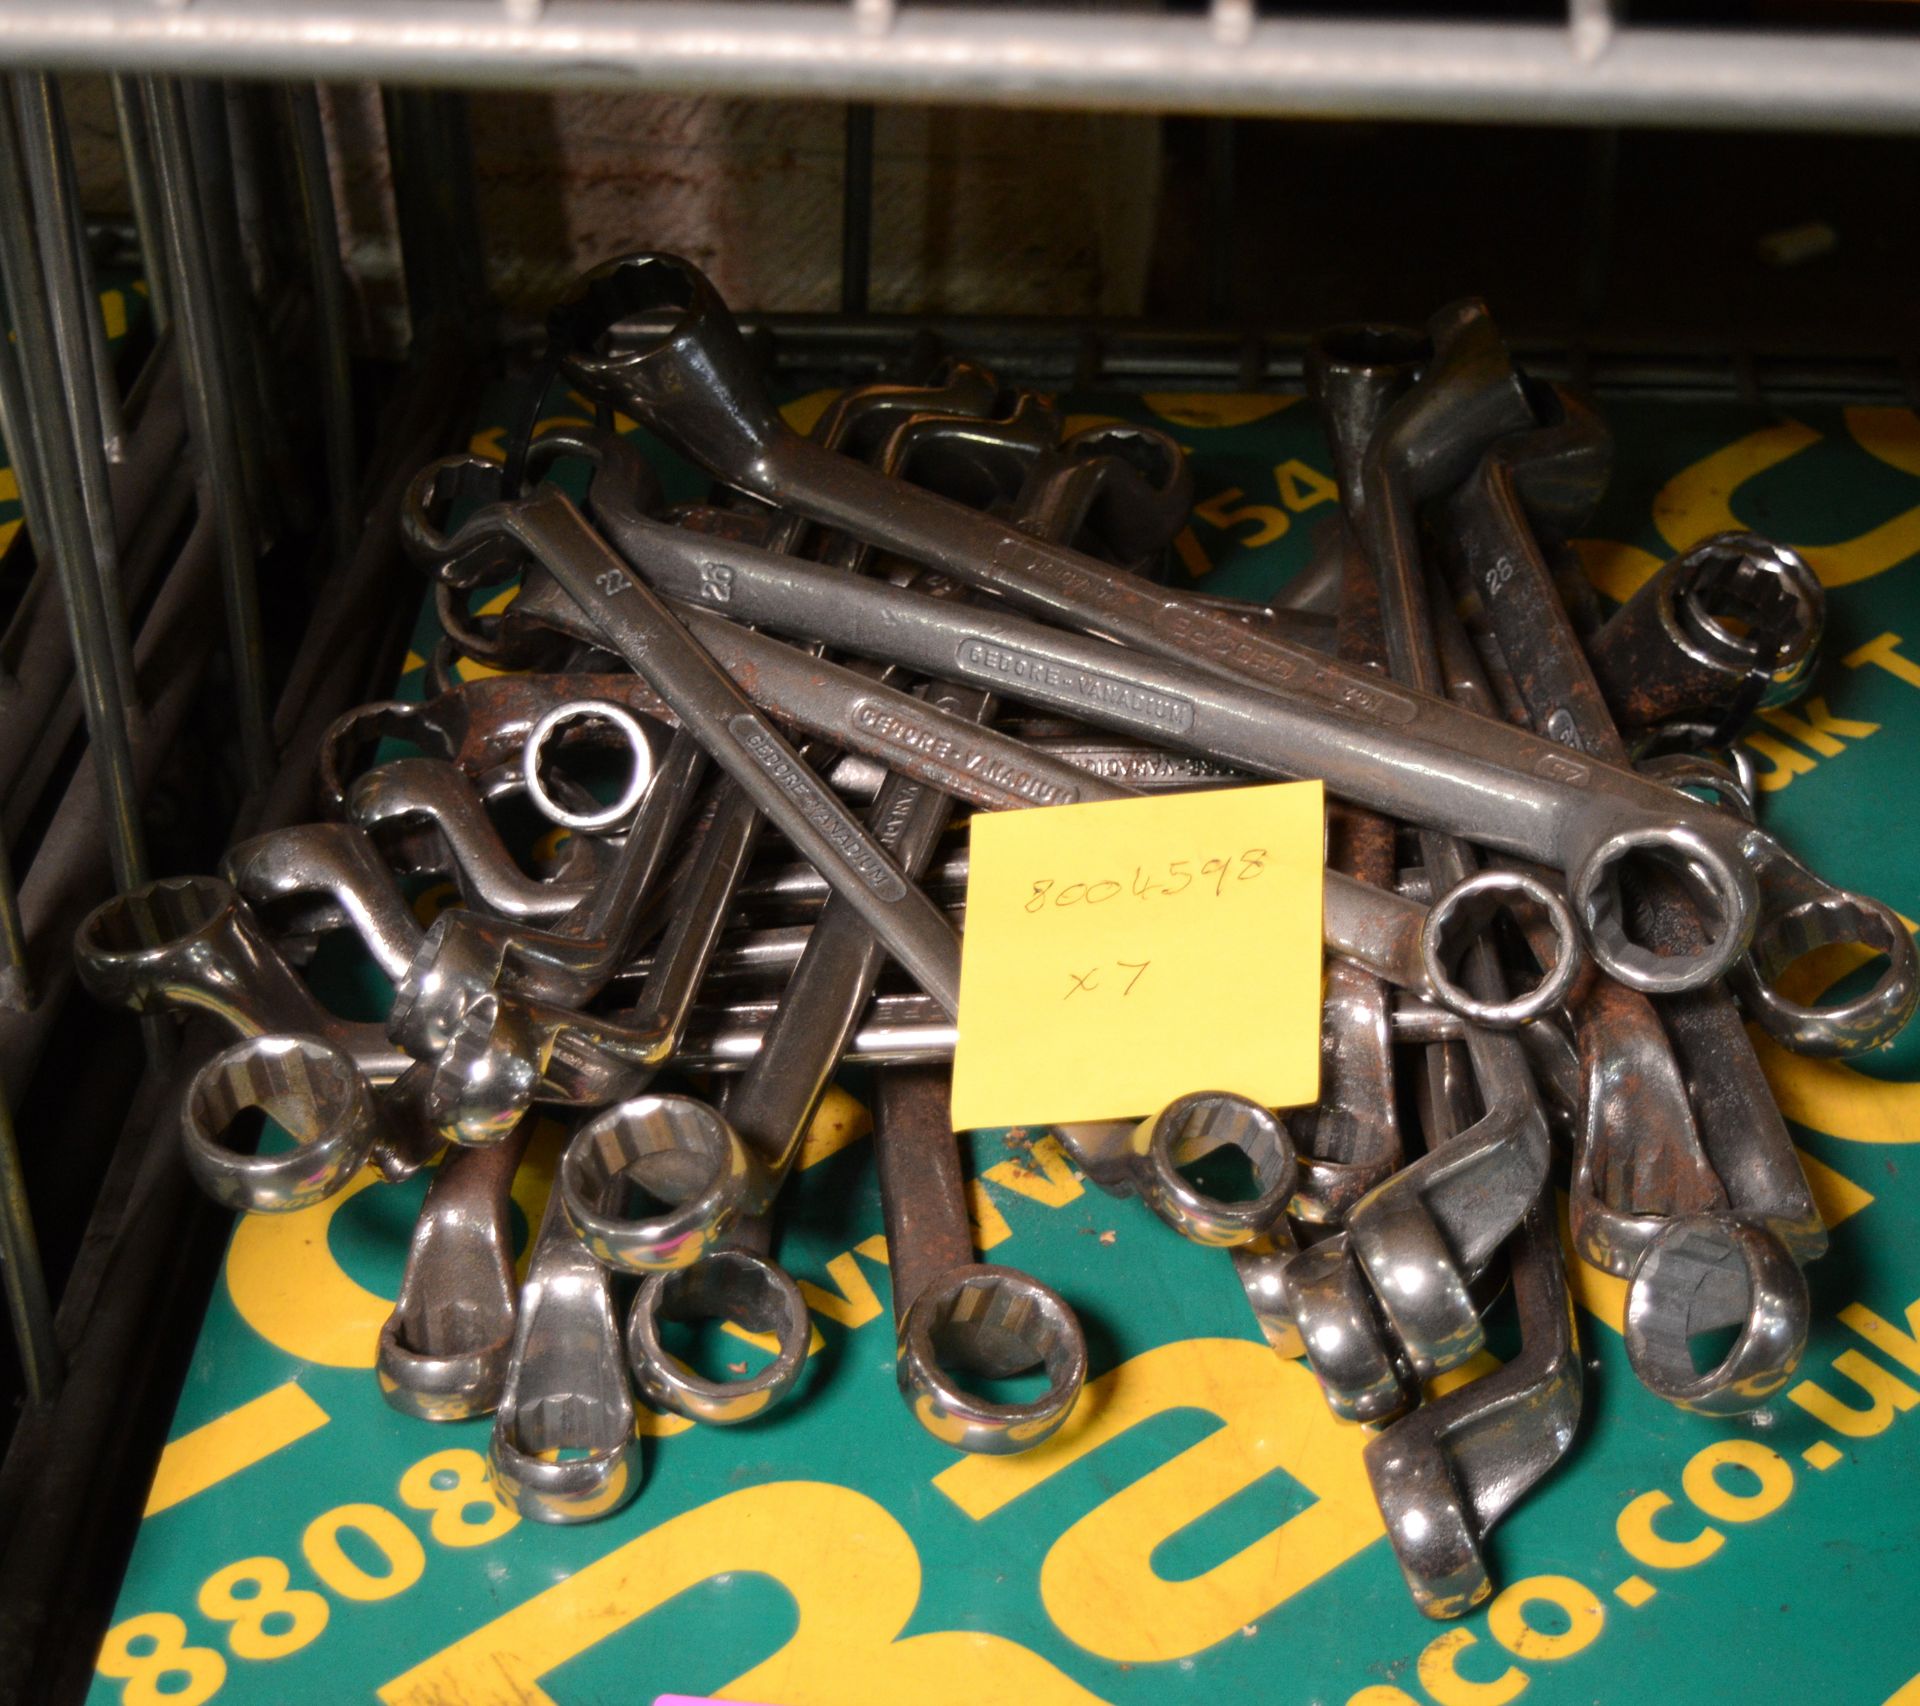 7 Sets of Ring Spanners